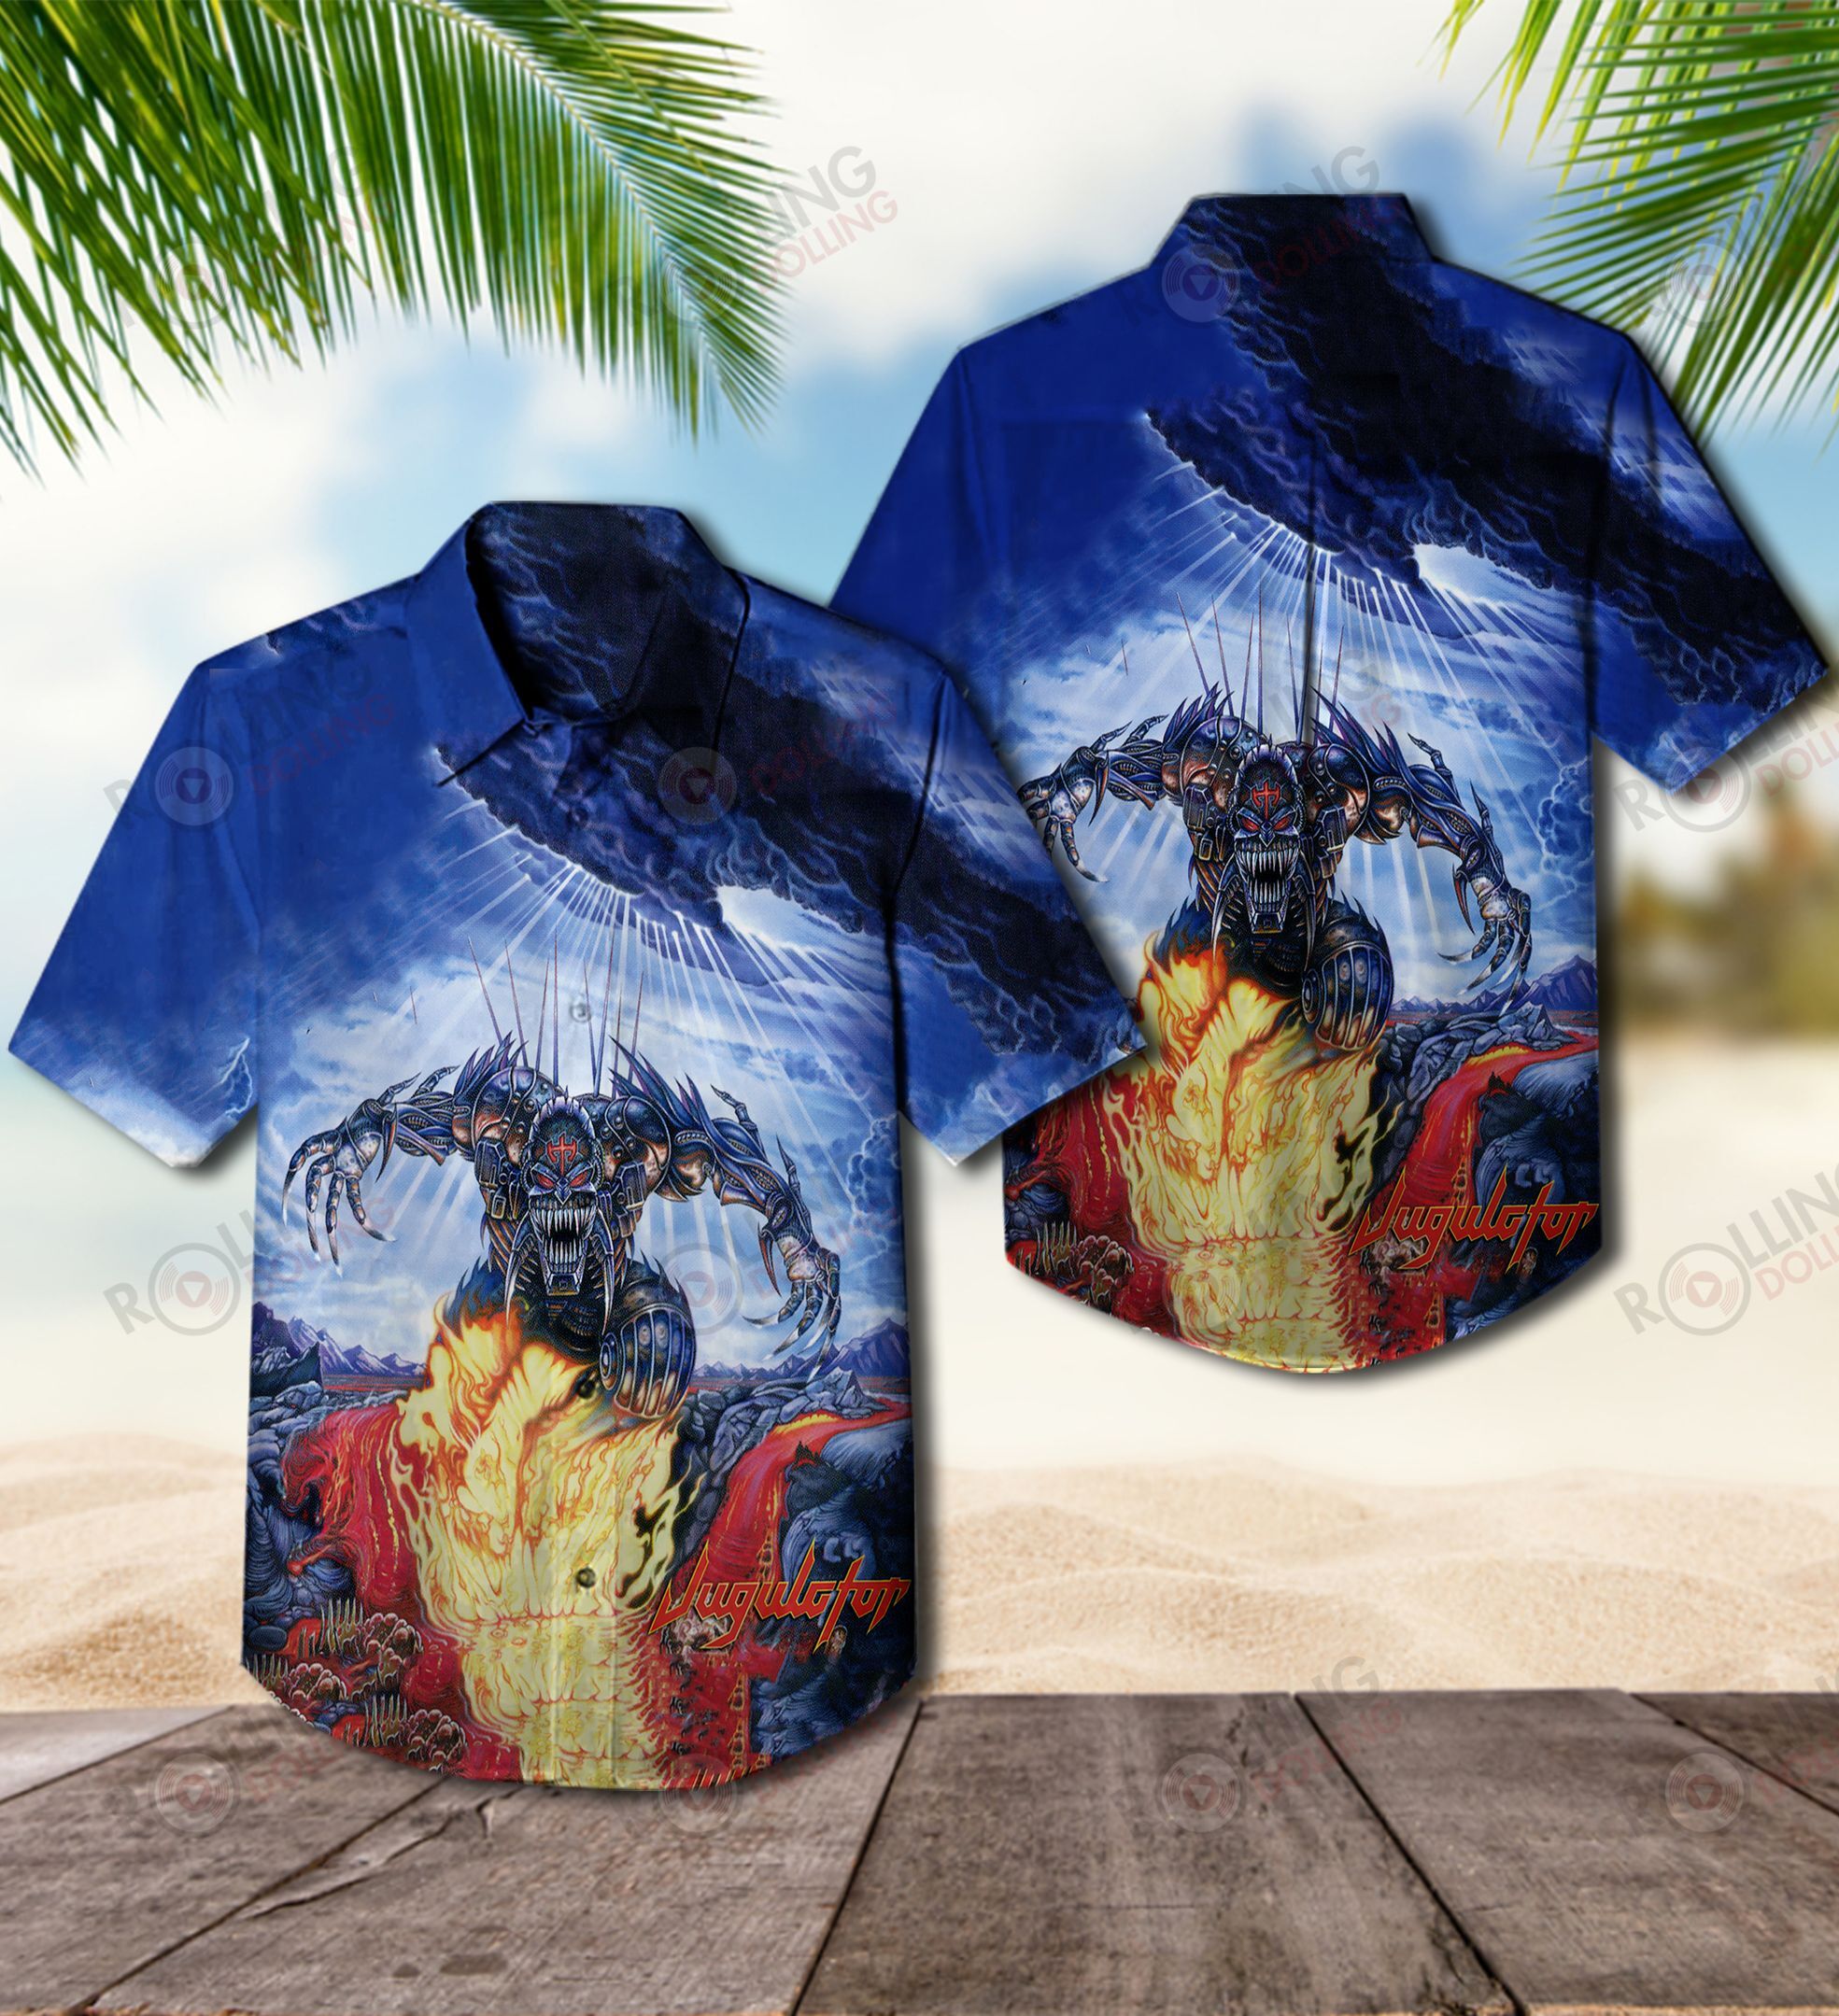 We have compiled a list of some of the best Hawaiian shirt that are available 231